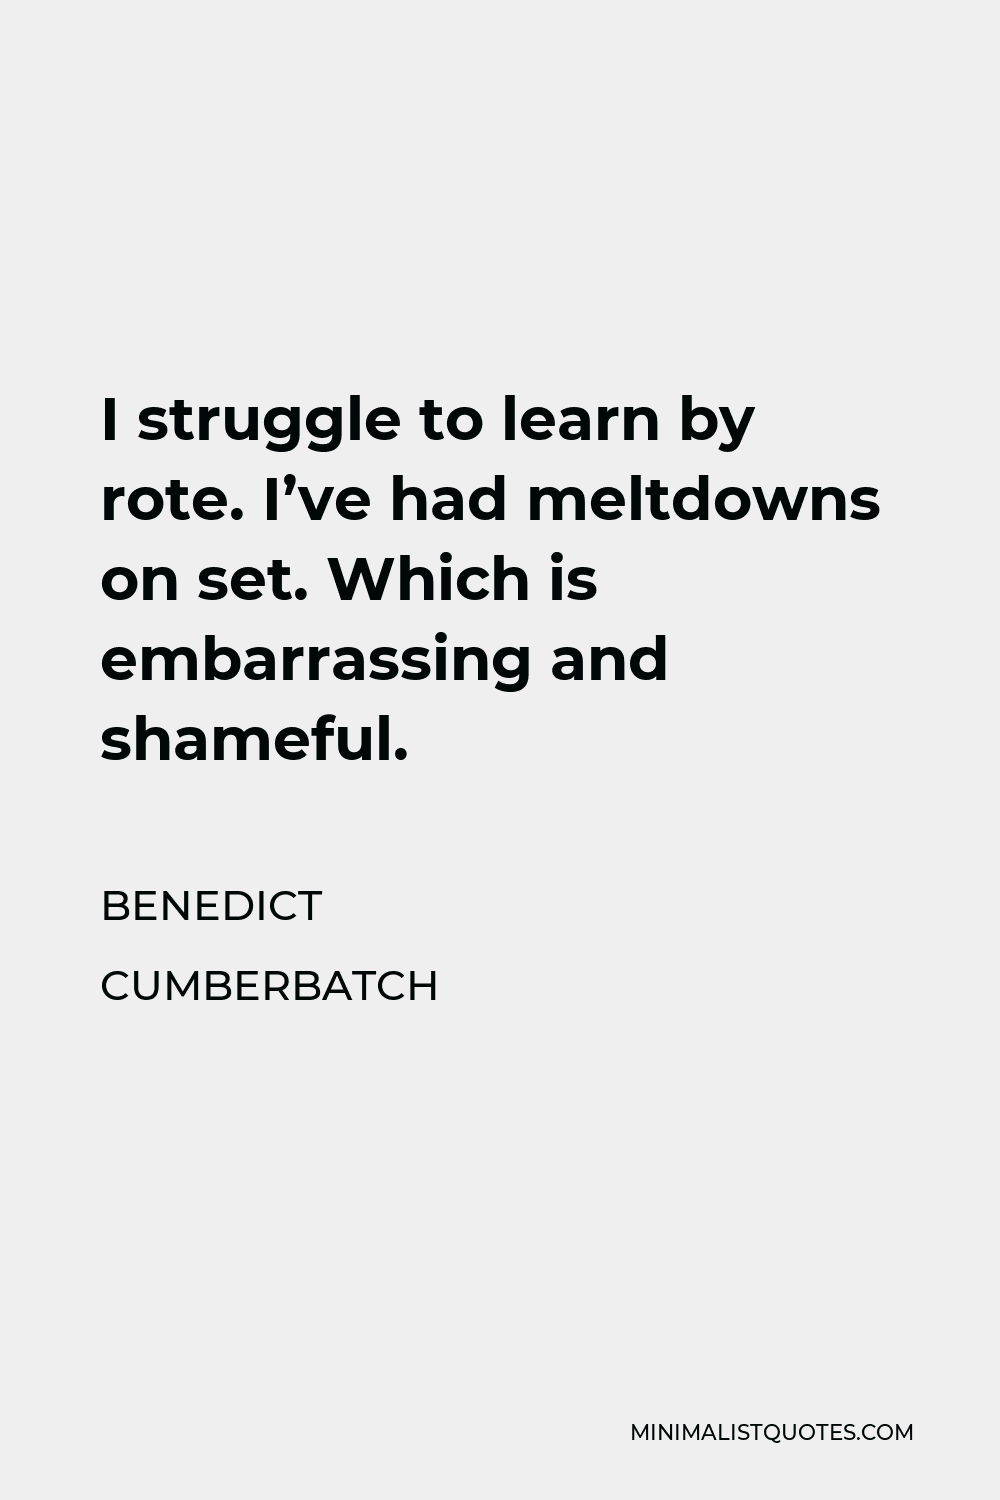 Benedict Cumberbatch Quote - I struggle to learn by rote. I’ve had meltdowns on set. Which is embarrassing and shameful.